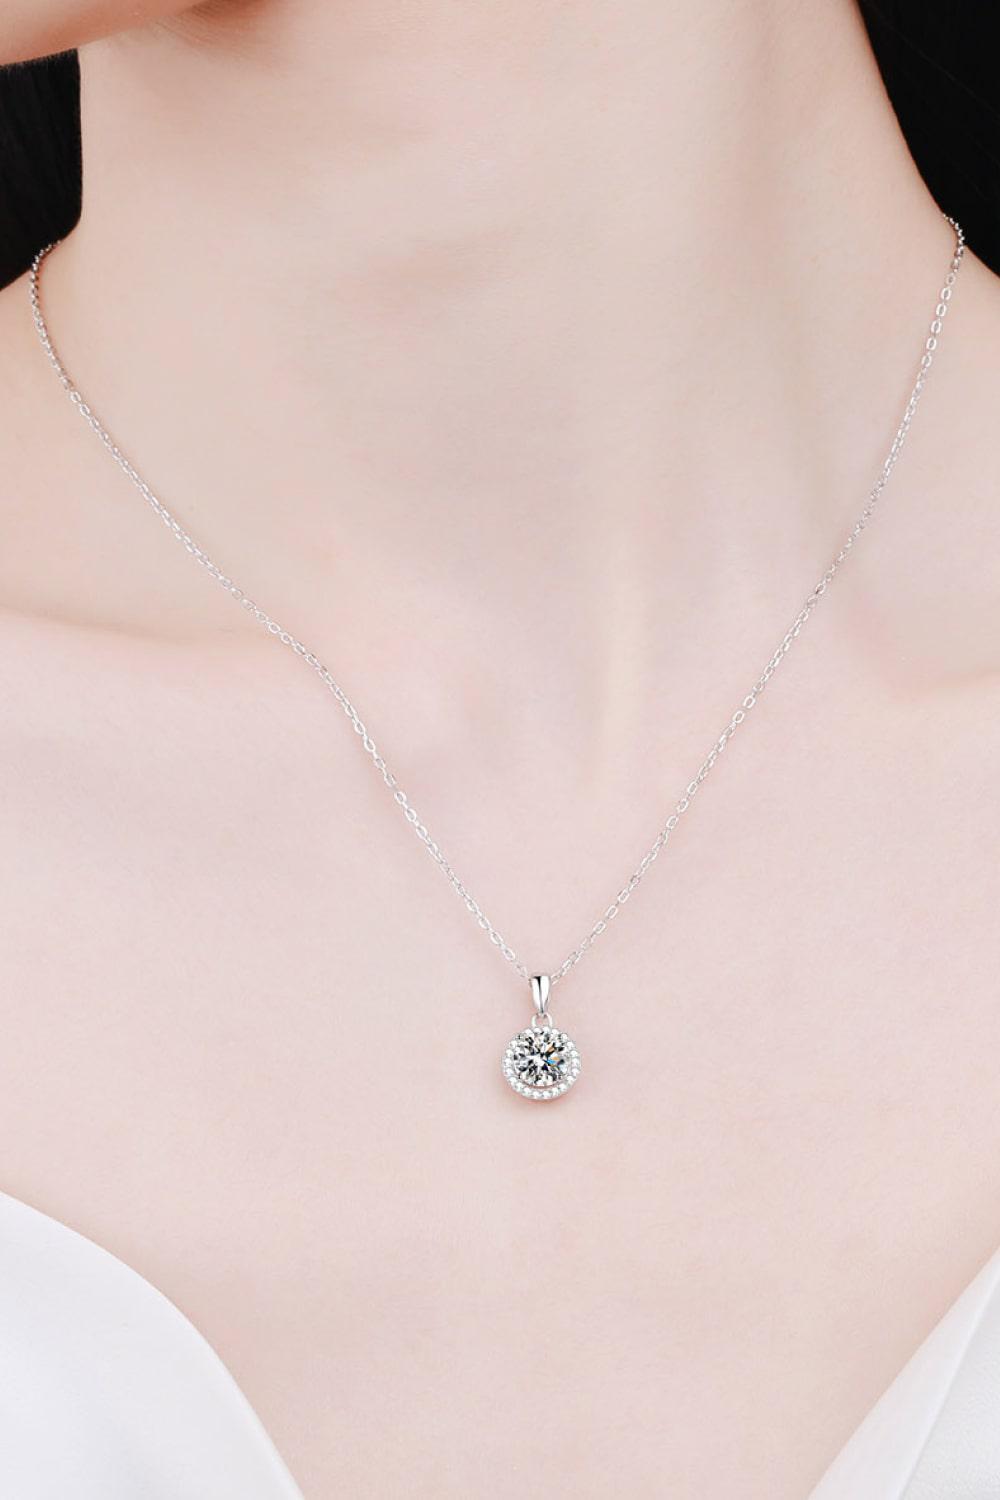 Chance to Charm 1 Carat Moissanite Round Pendant Chain Necklace BLUE ZONE PLANET